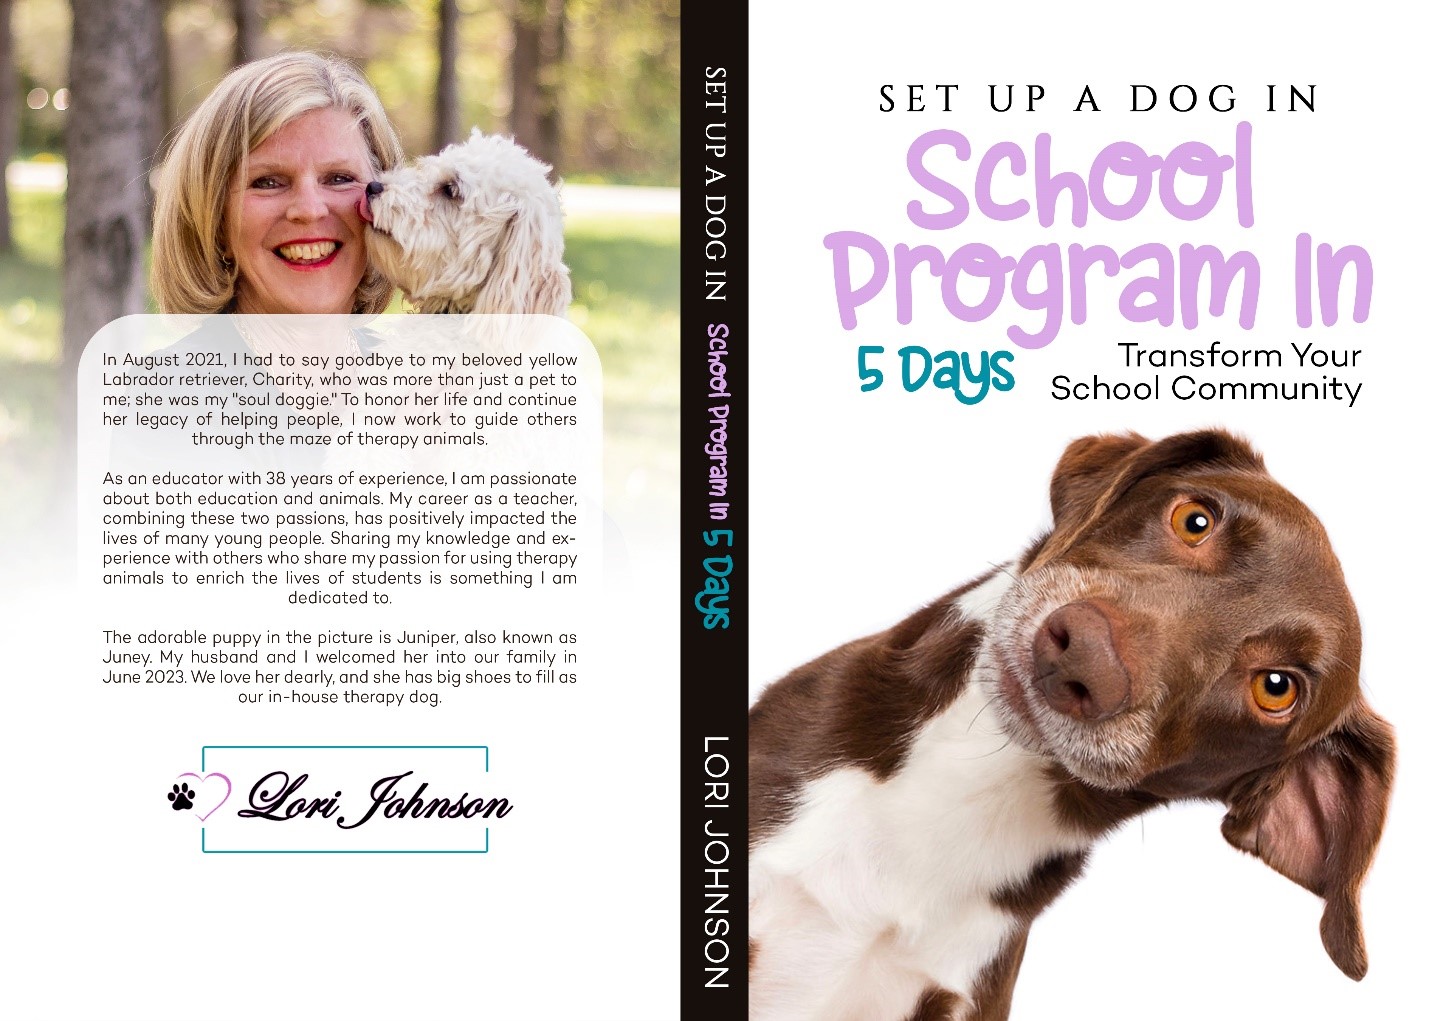 "Set Up a Dogs in School Program in 5 Days" by Lori Johnson: A Revolutionary Guide to Transforming Education with Canine Companions